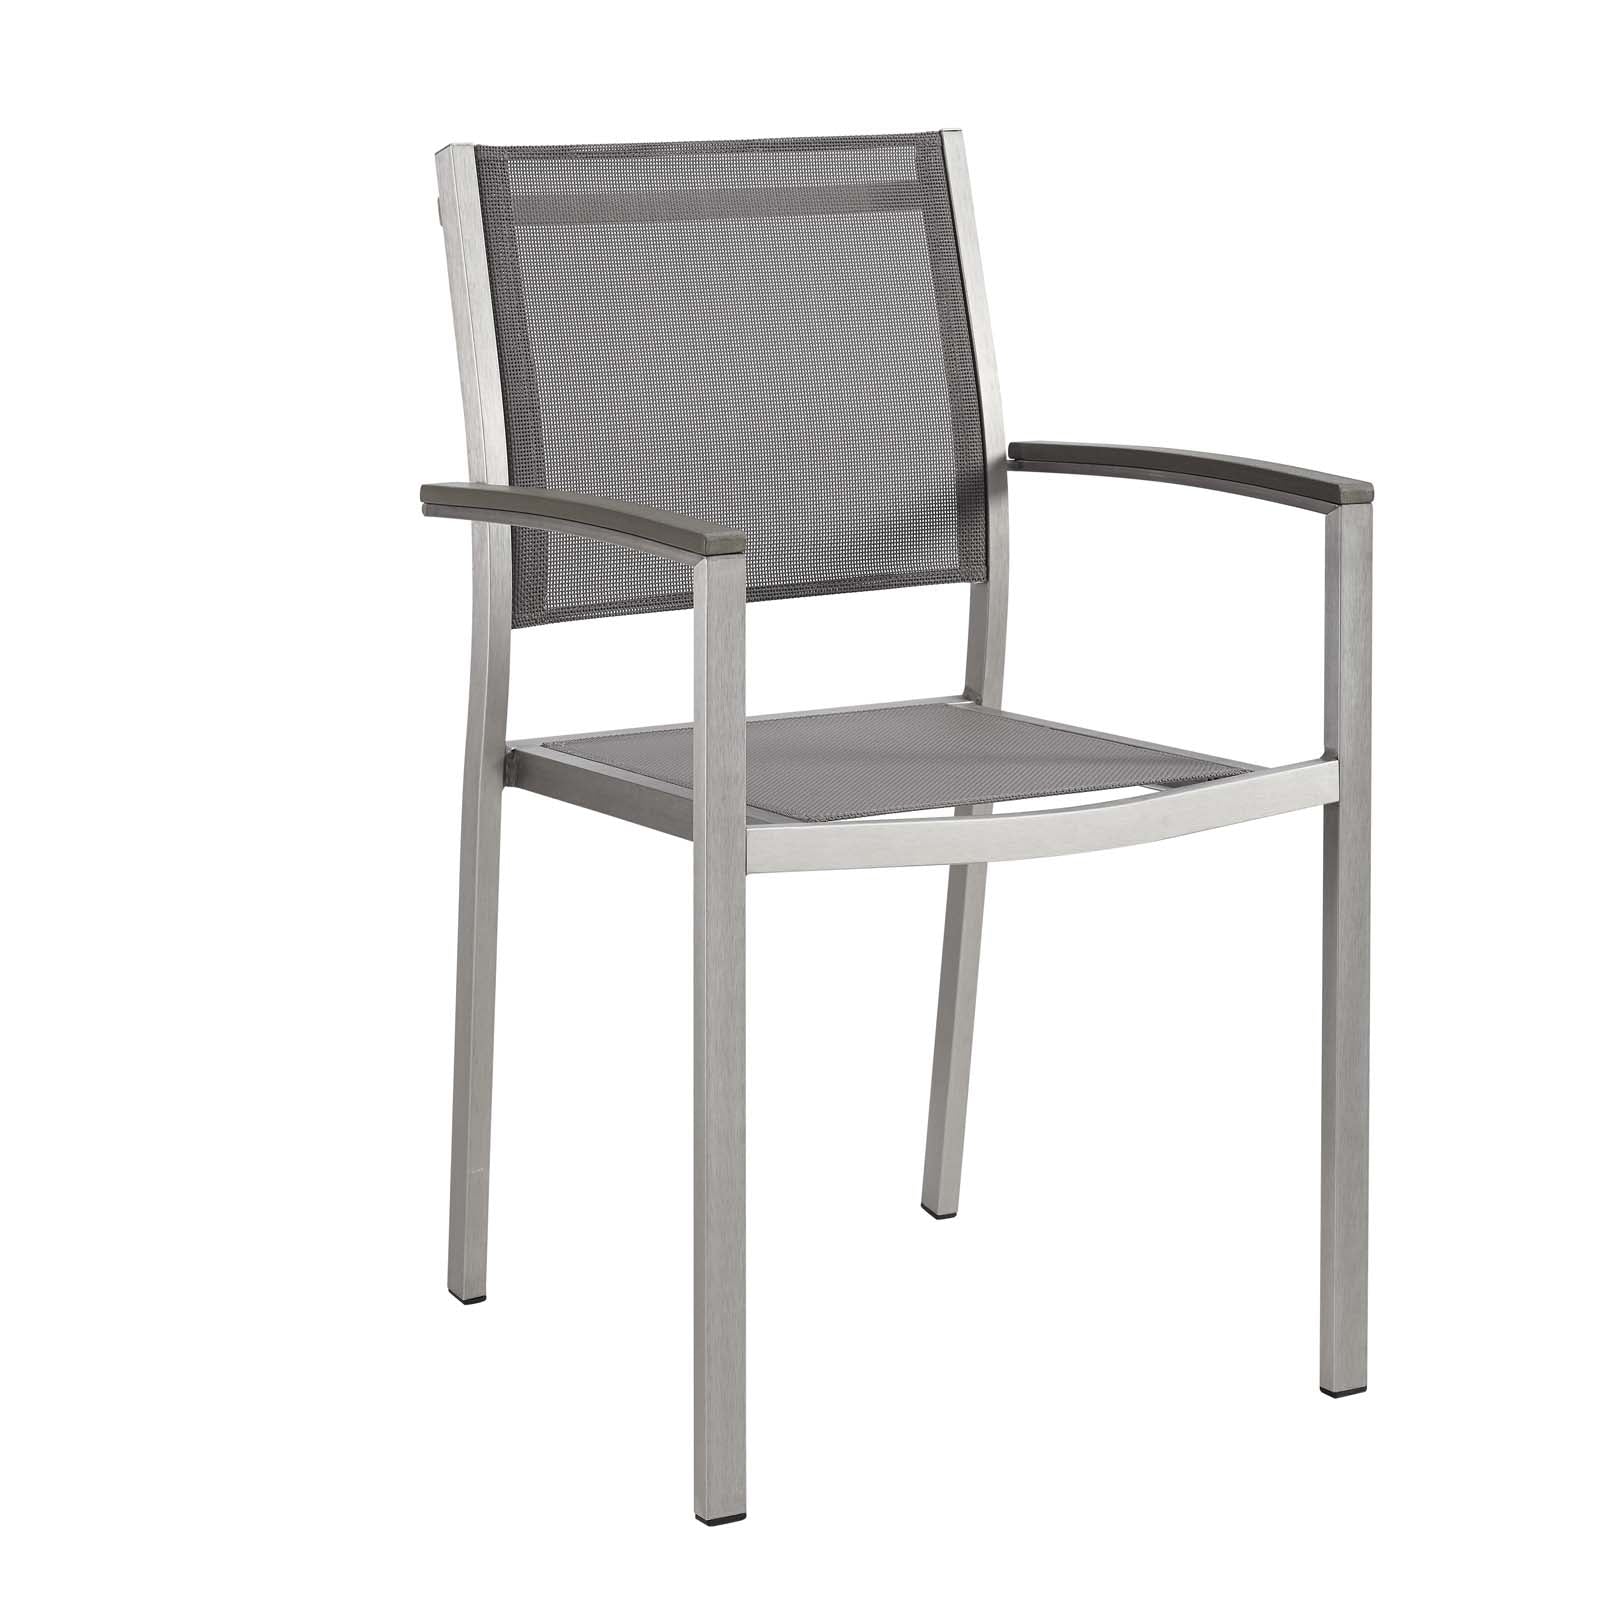 Shore Outdoor Patio Aluminum Dining Chair-Outdoor Dining Chair-Modway-Wall2Wall Furnishings